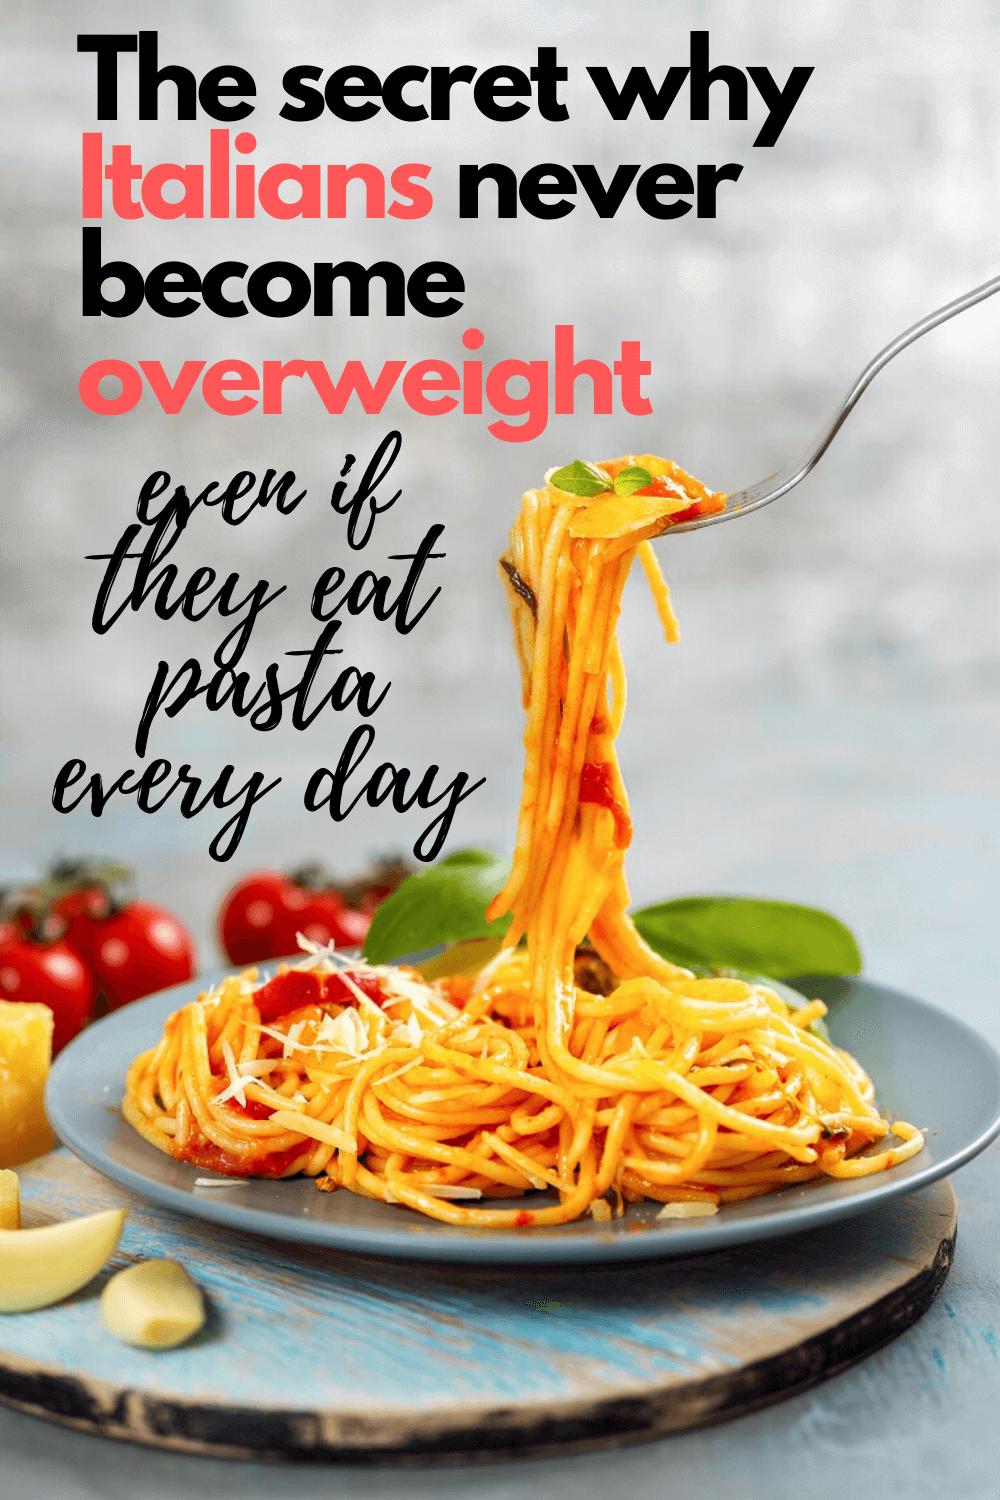 The secret why Italians never become overweight, even if they eat pasta every day